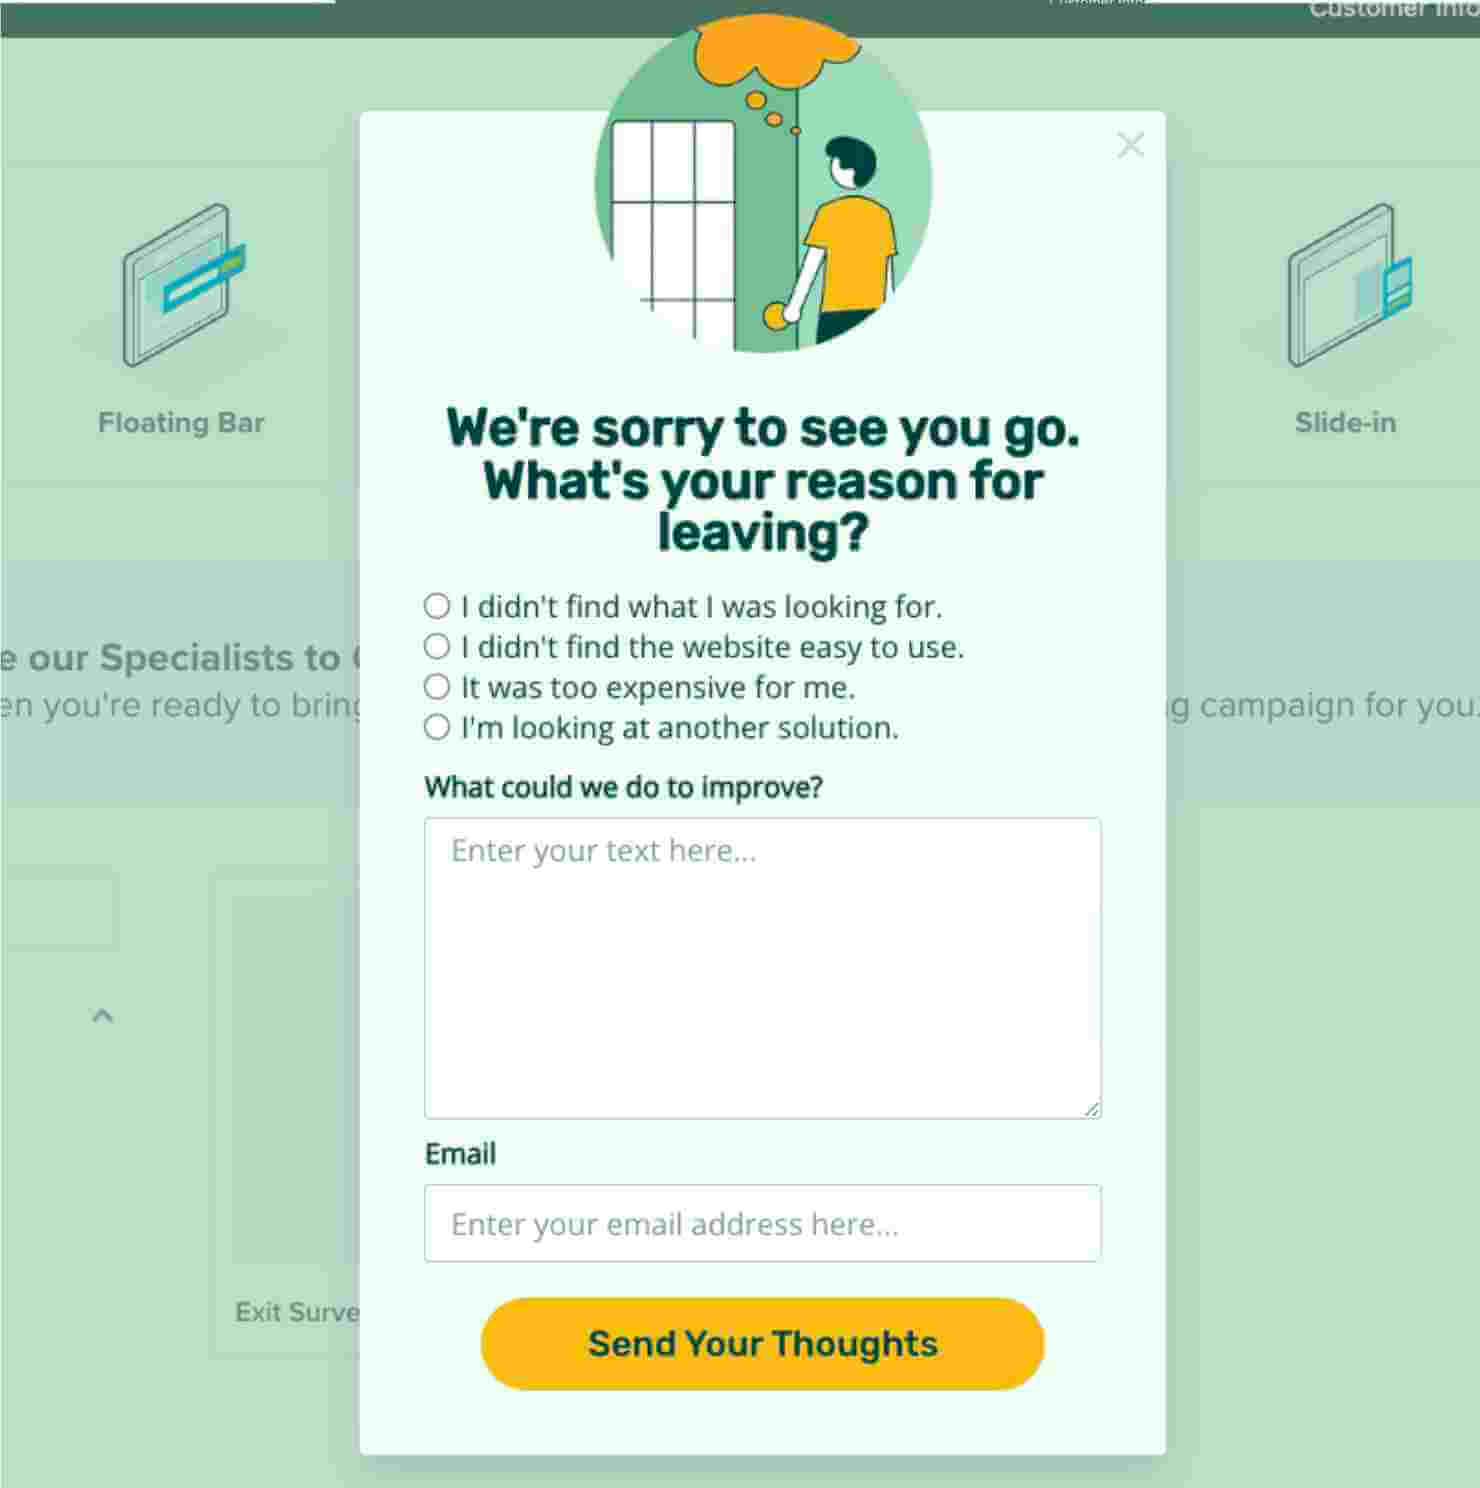 OptinMonster Exit Survey Popup template. It says "We're sorry to see you go. What's your reason for leaving?" Options include I didn't find what I was looking for, I didn't find the website easy to use, It was too expensive for me, and I'm looking at another solution. Then there's a "What could we do to improve?" text field, and an email entry field.